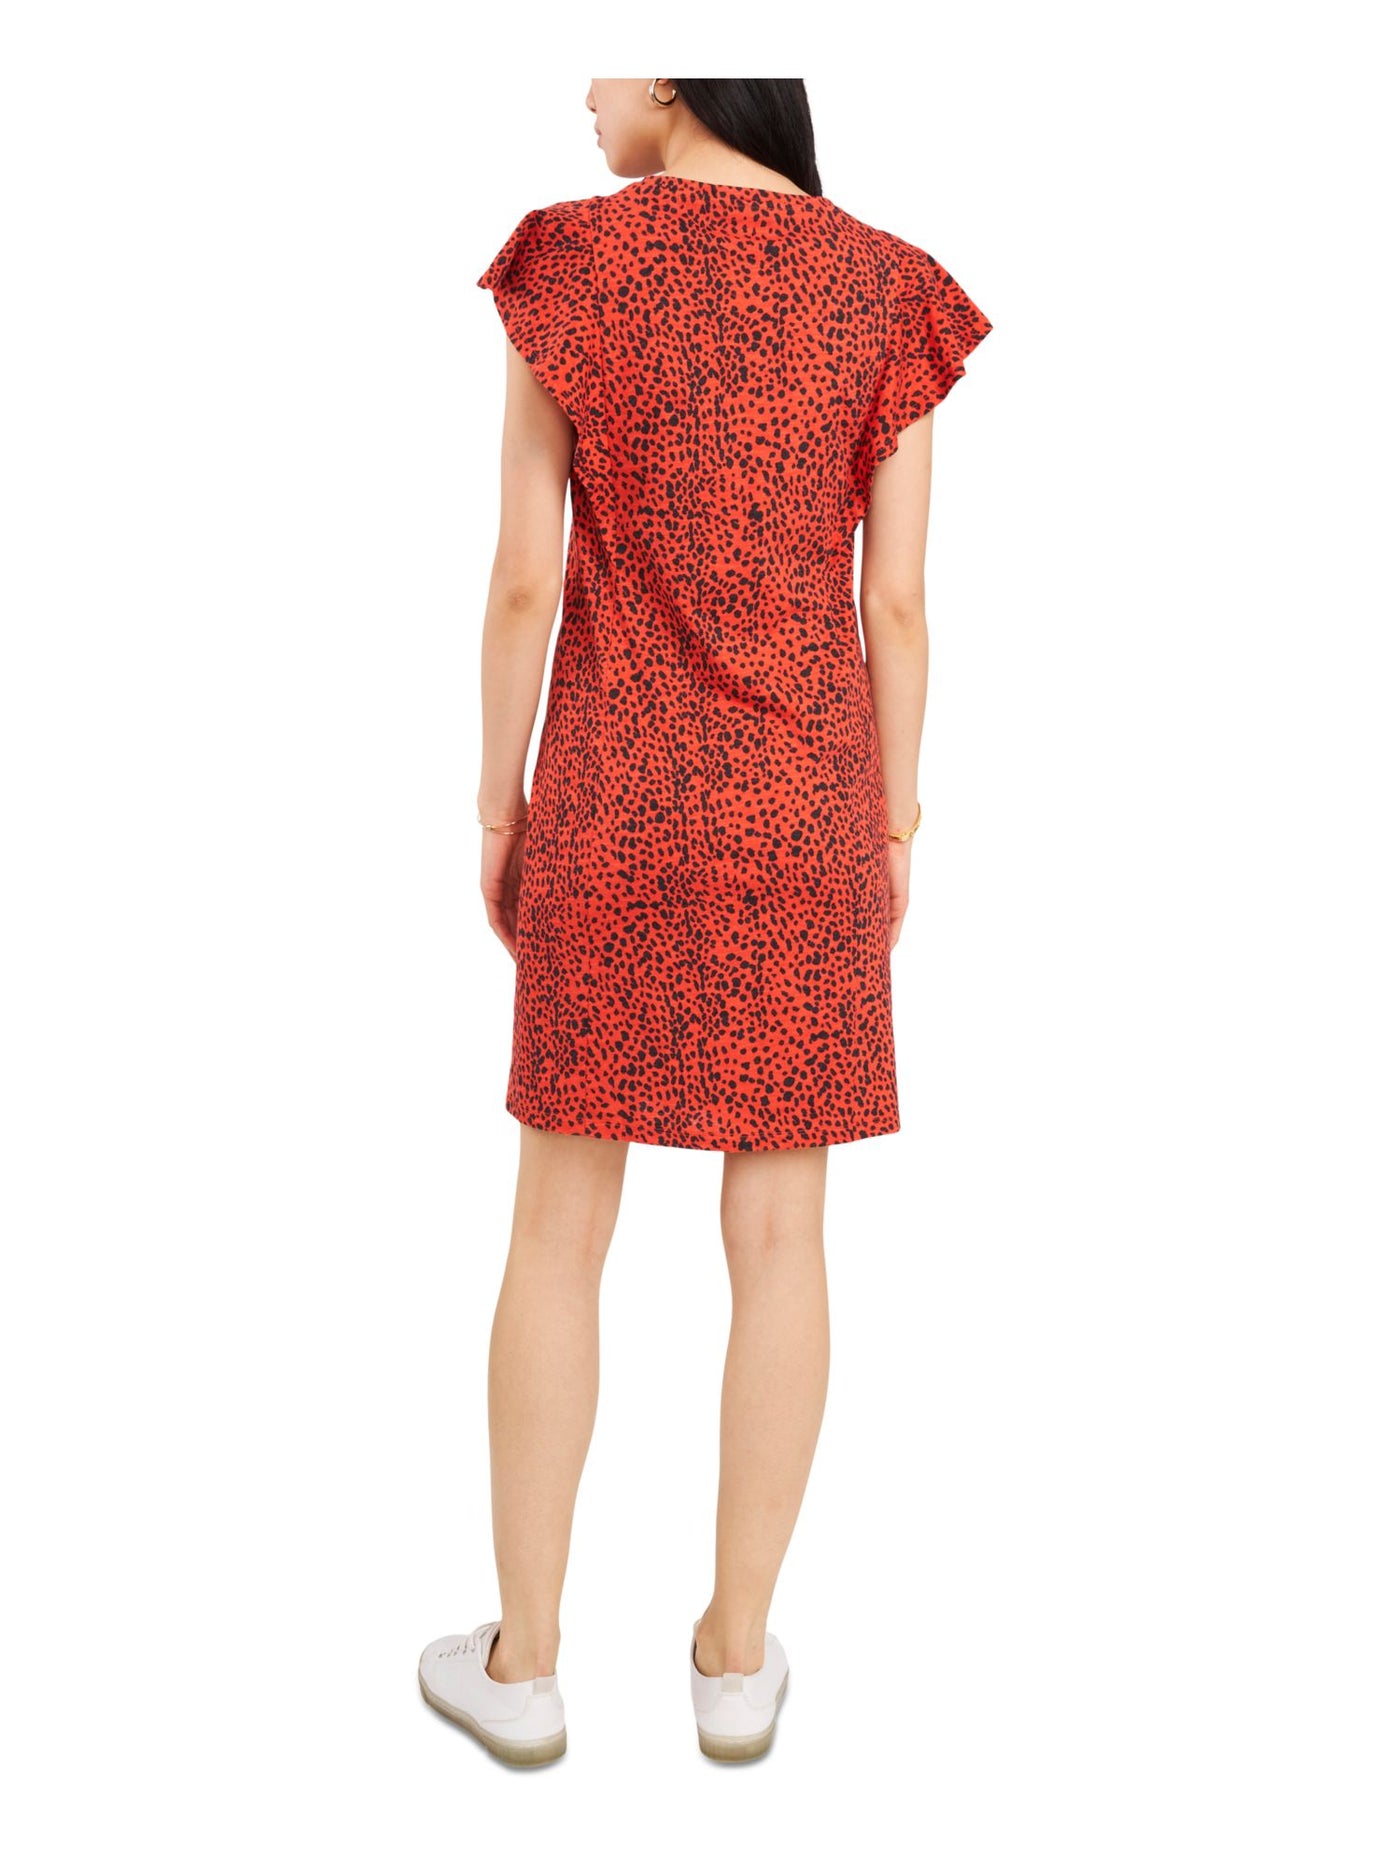 VINCE CAMUTO Womens Red Animal Print Flutter Sleeve Round Neck Short Party Dress XS